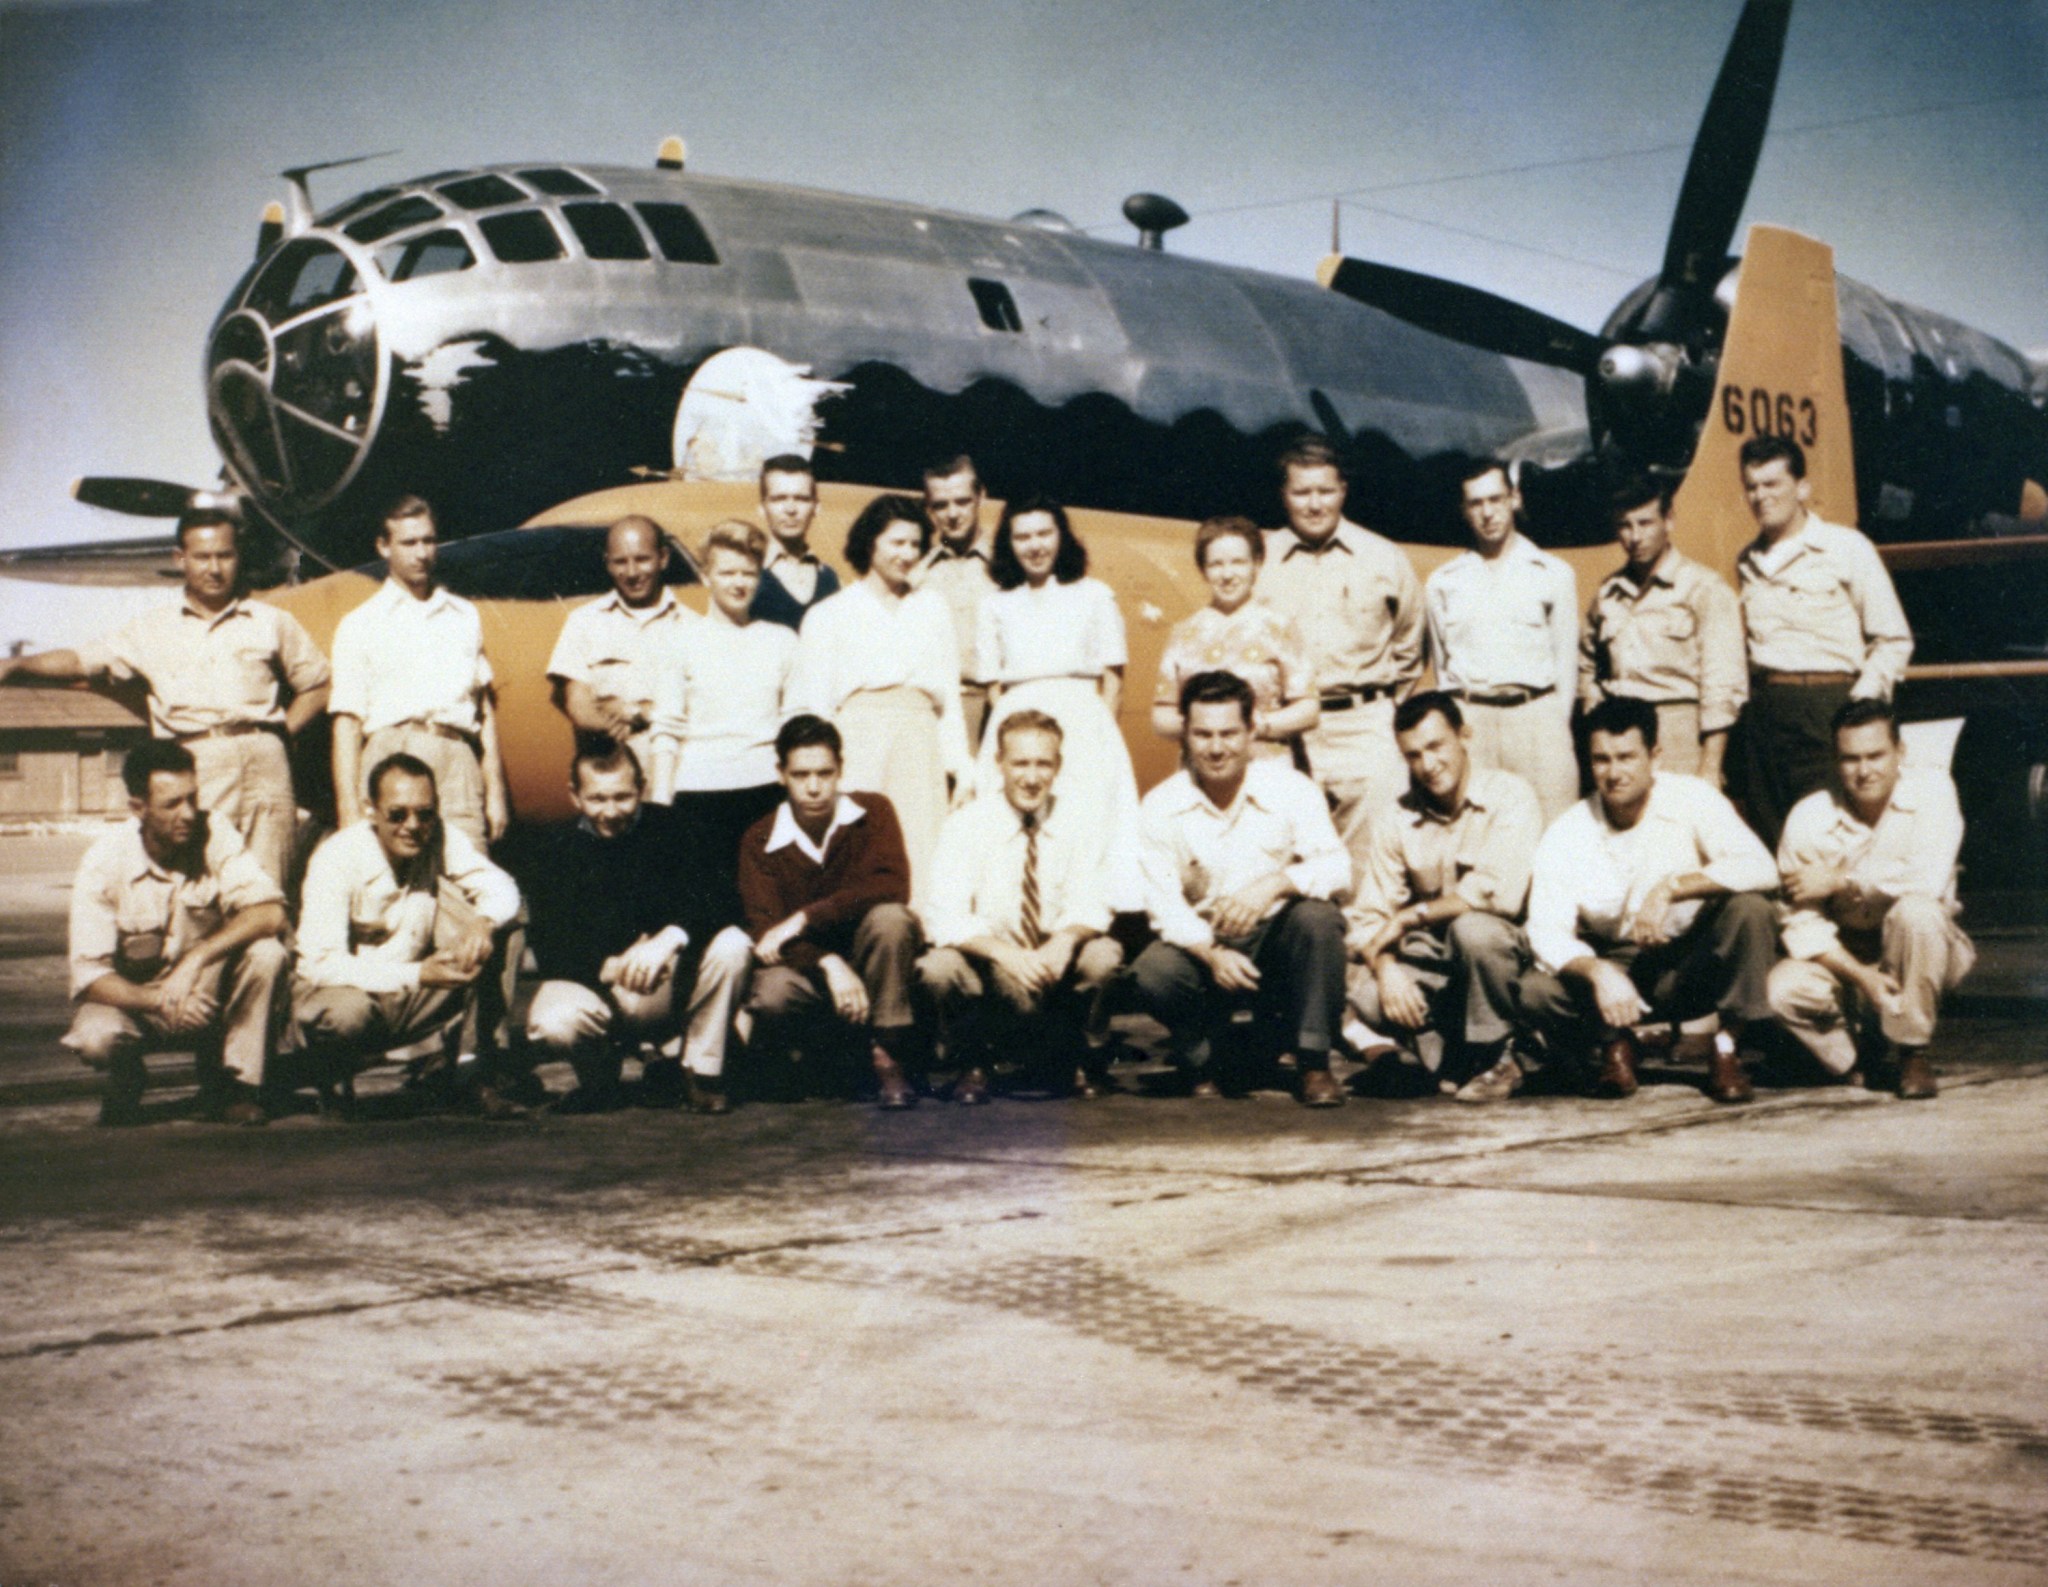 The NACA contingent in October 1947 in front of the Bell X-1-2 and Boeing B-29 launch aircraft.